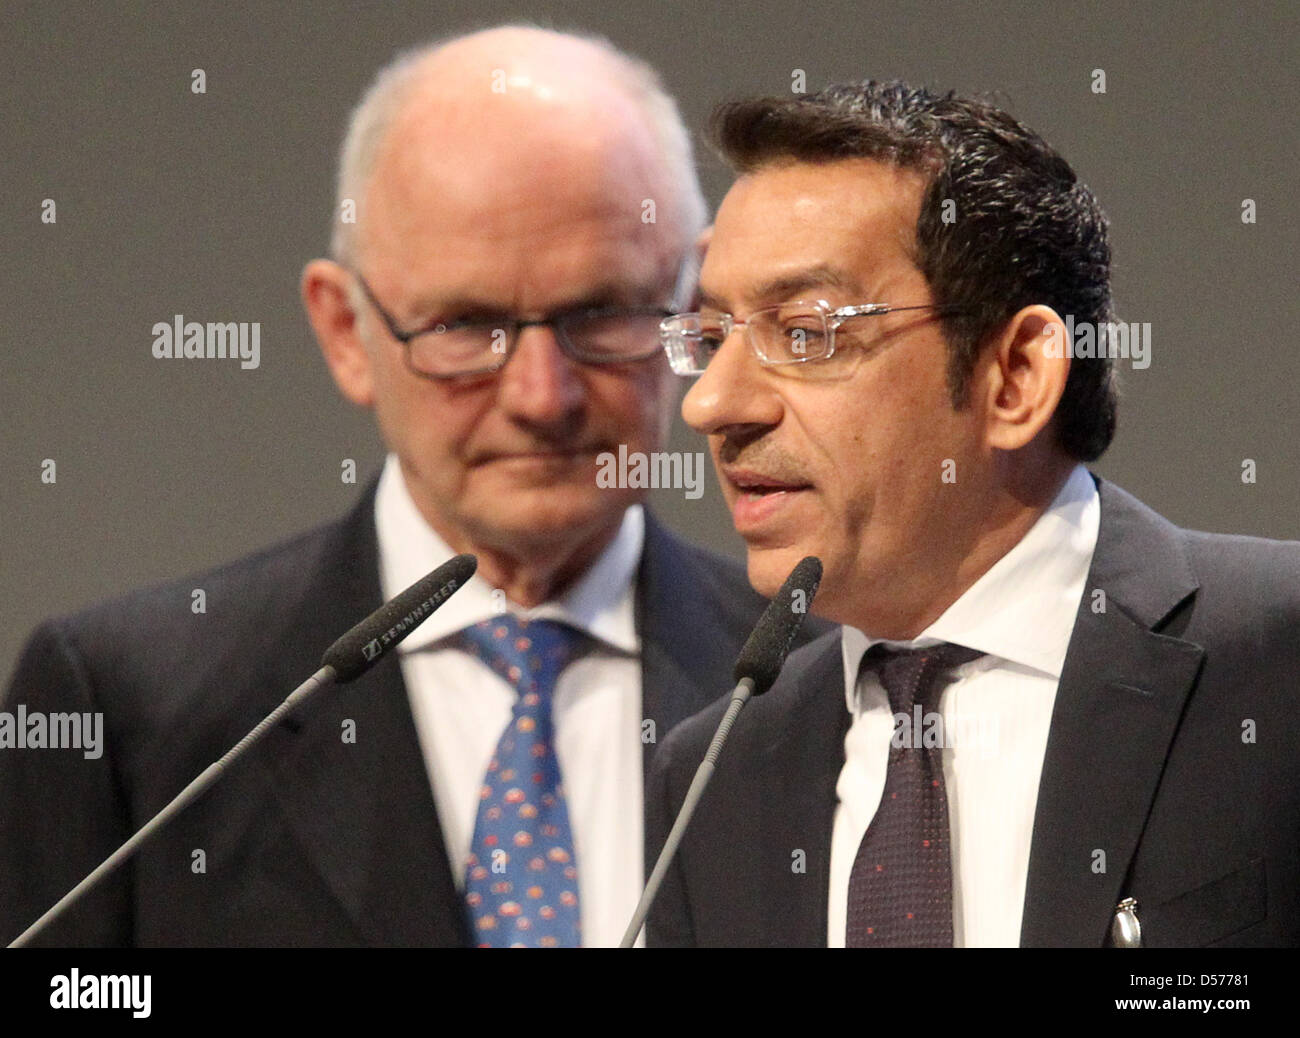 Ferdinand Piech, chairman of the supervisory board of Volkswagen AG (L), stands next to the new member of the supervisory board, Hussain Ali Al-Abdulla from Qatar, at the company's general meeting in Hamburg, Germany, 22 April 2010. The emirate Qatar is a new major shareholder of Volkswagen. Europe's largest automaker Volkswagen increased its profits in the first quarter of 2010. T Stock Photo